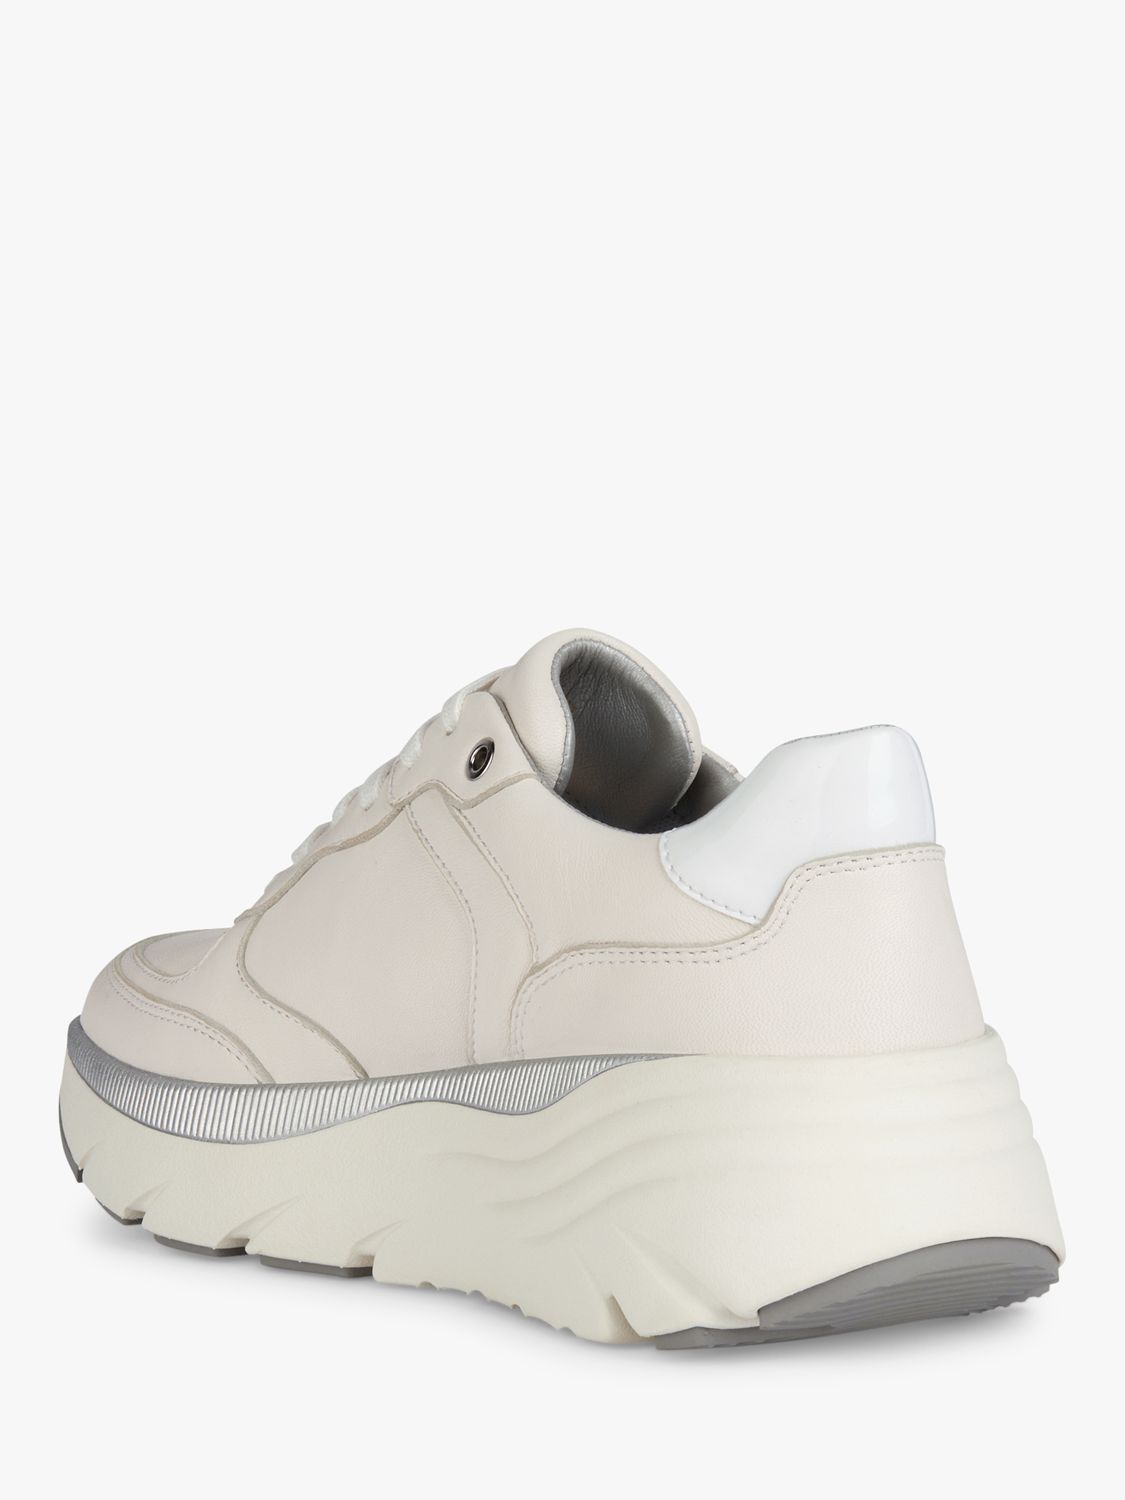 Geox Diamanta Leather Lace Up Shoes, White at John & Partners